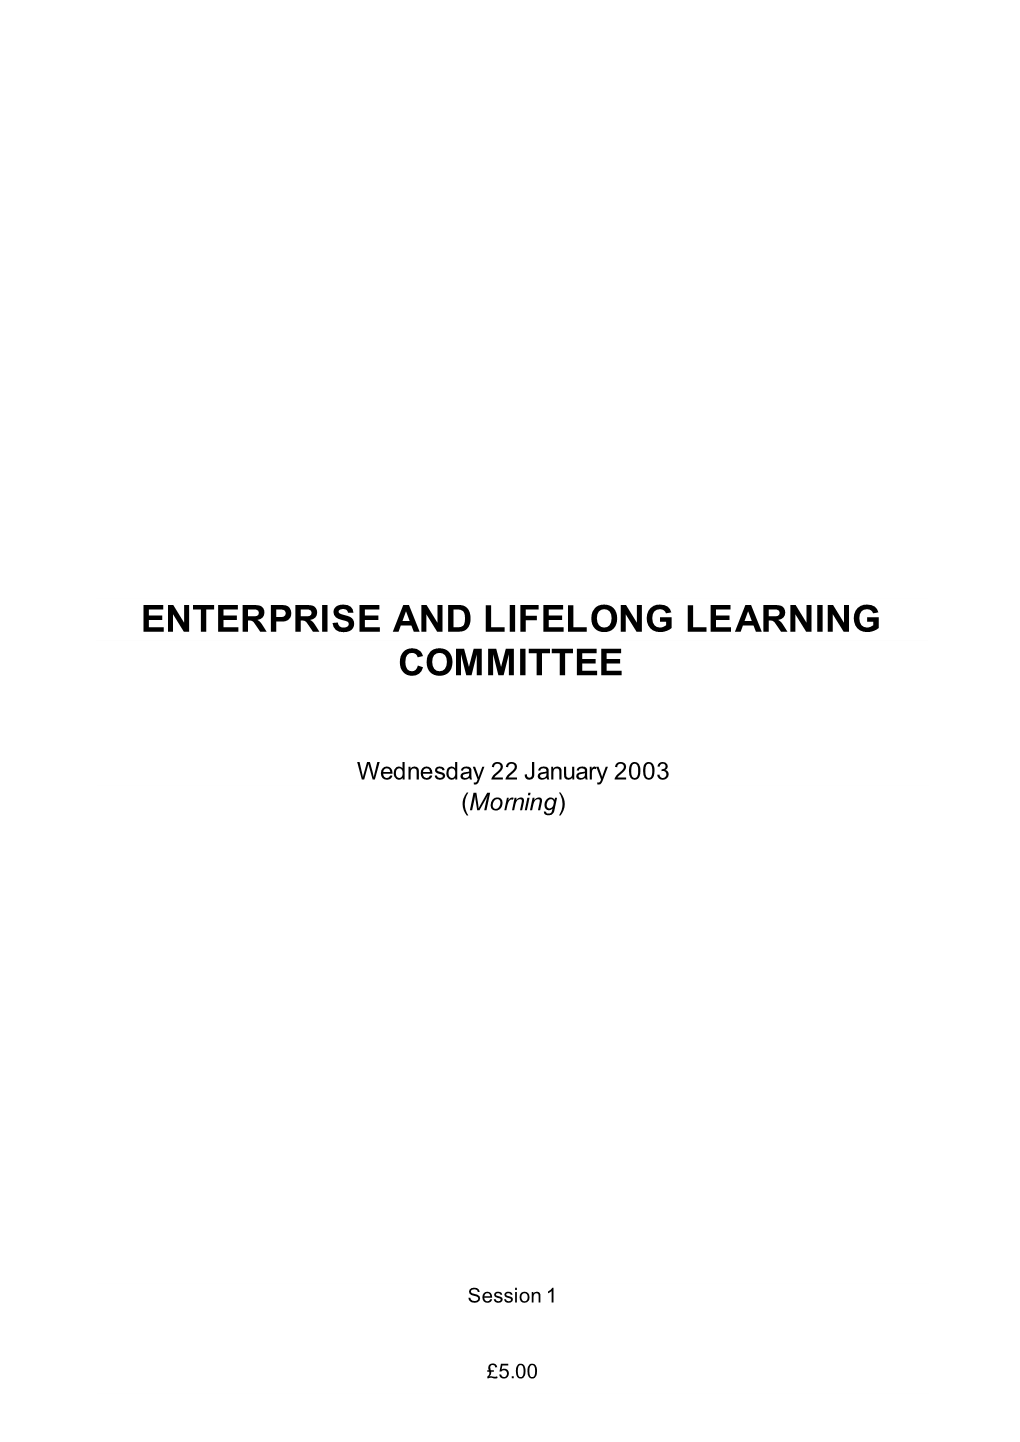 Enterprise and Lifelong Learning Committee